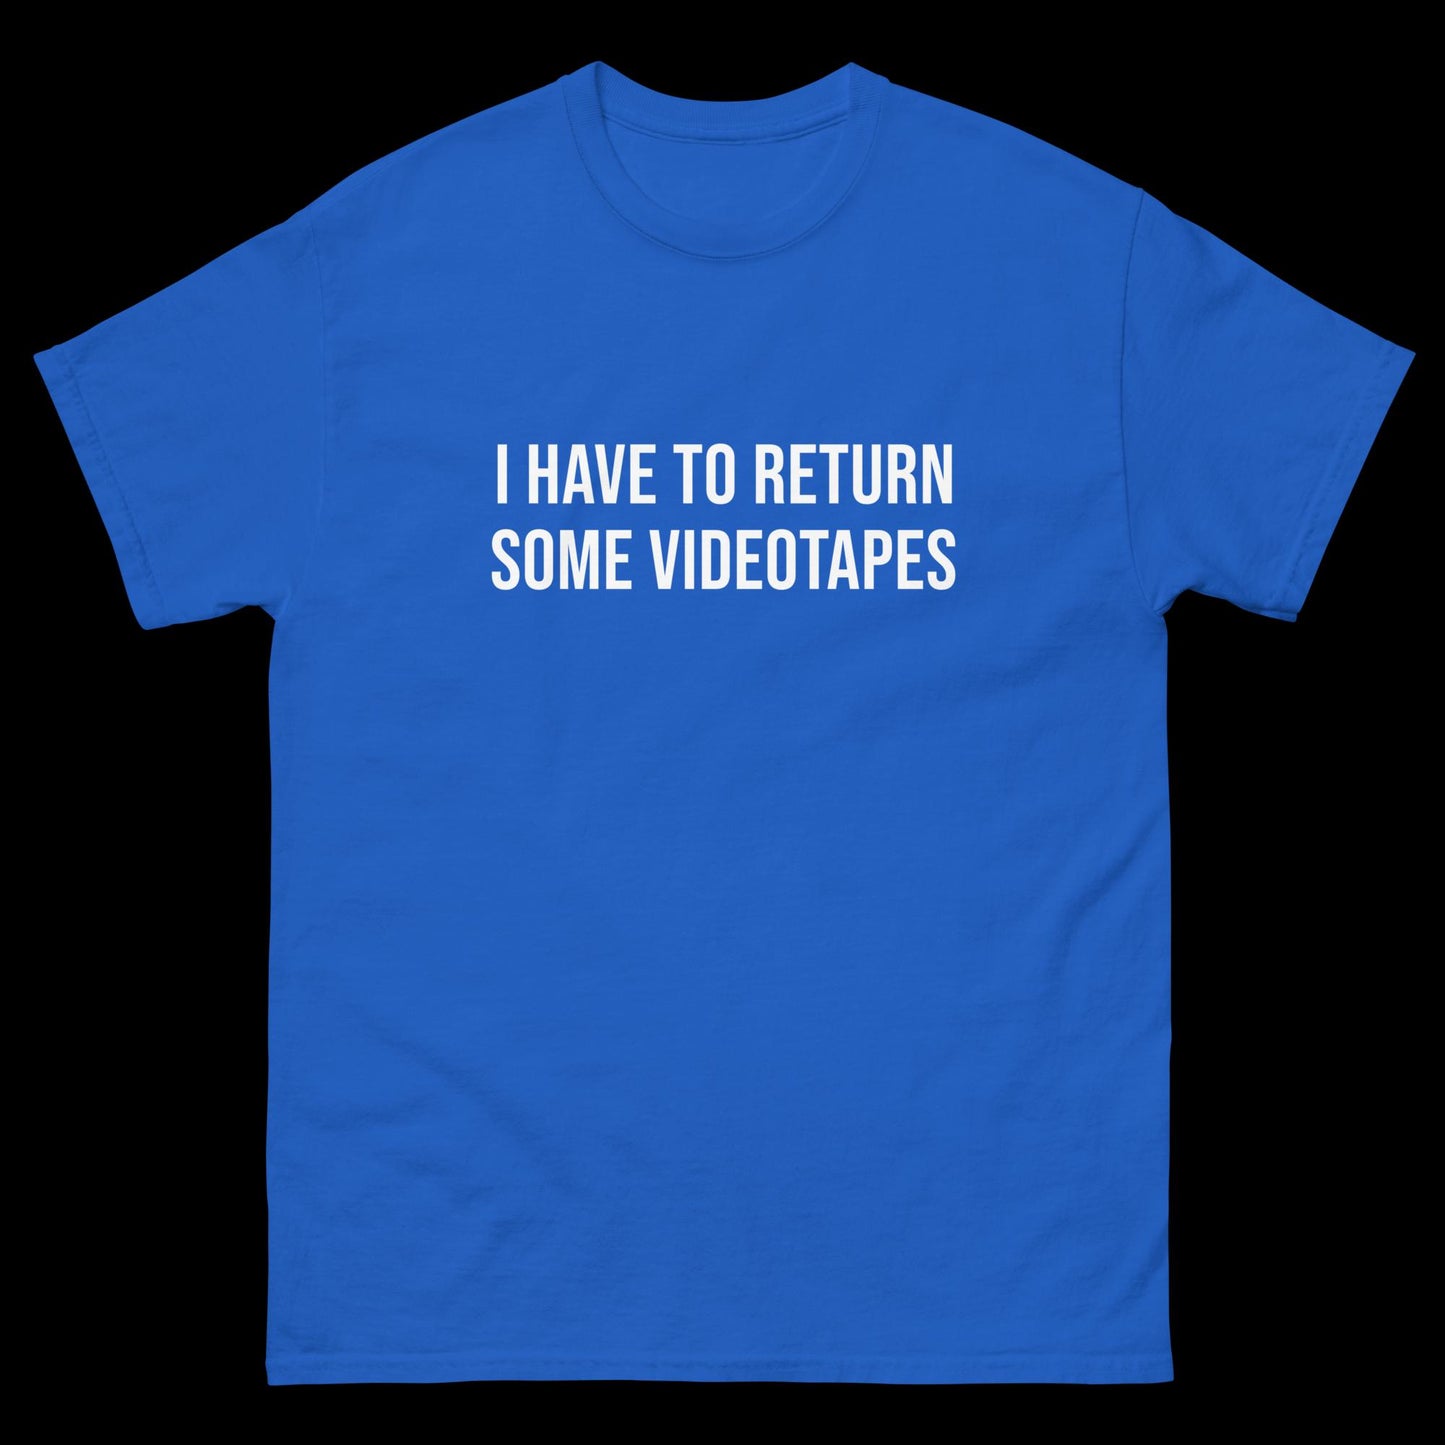 I Have To Return Some Videotapes - Classic T-Shirt